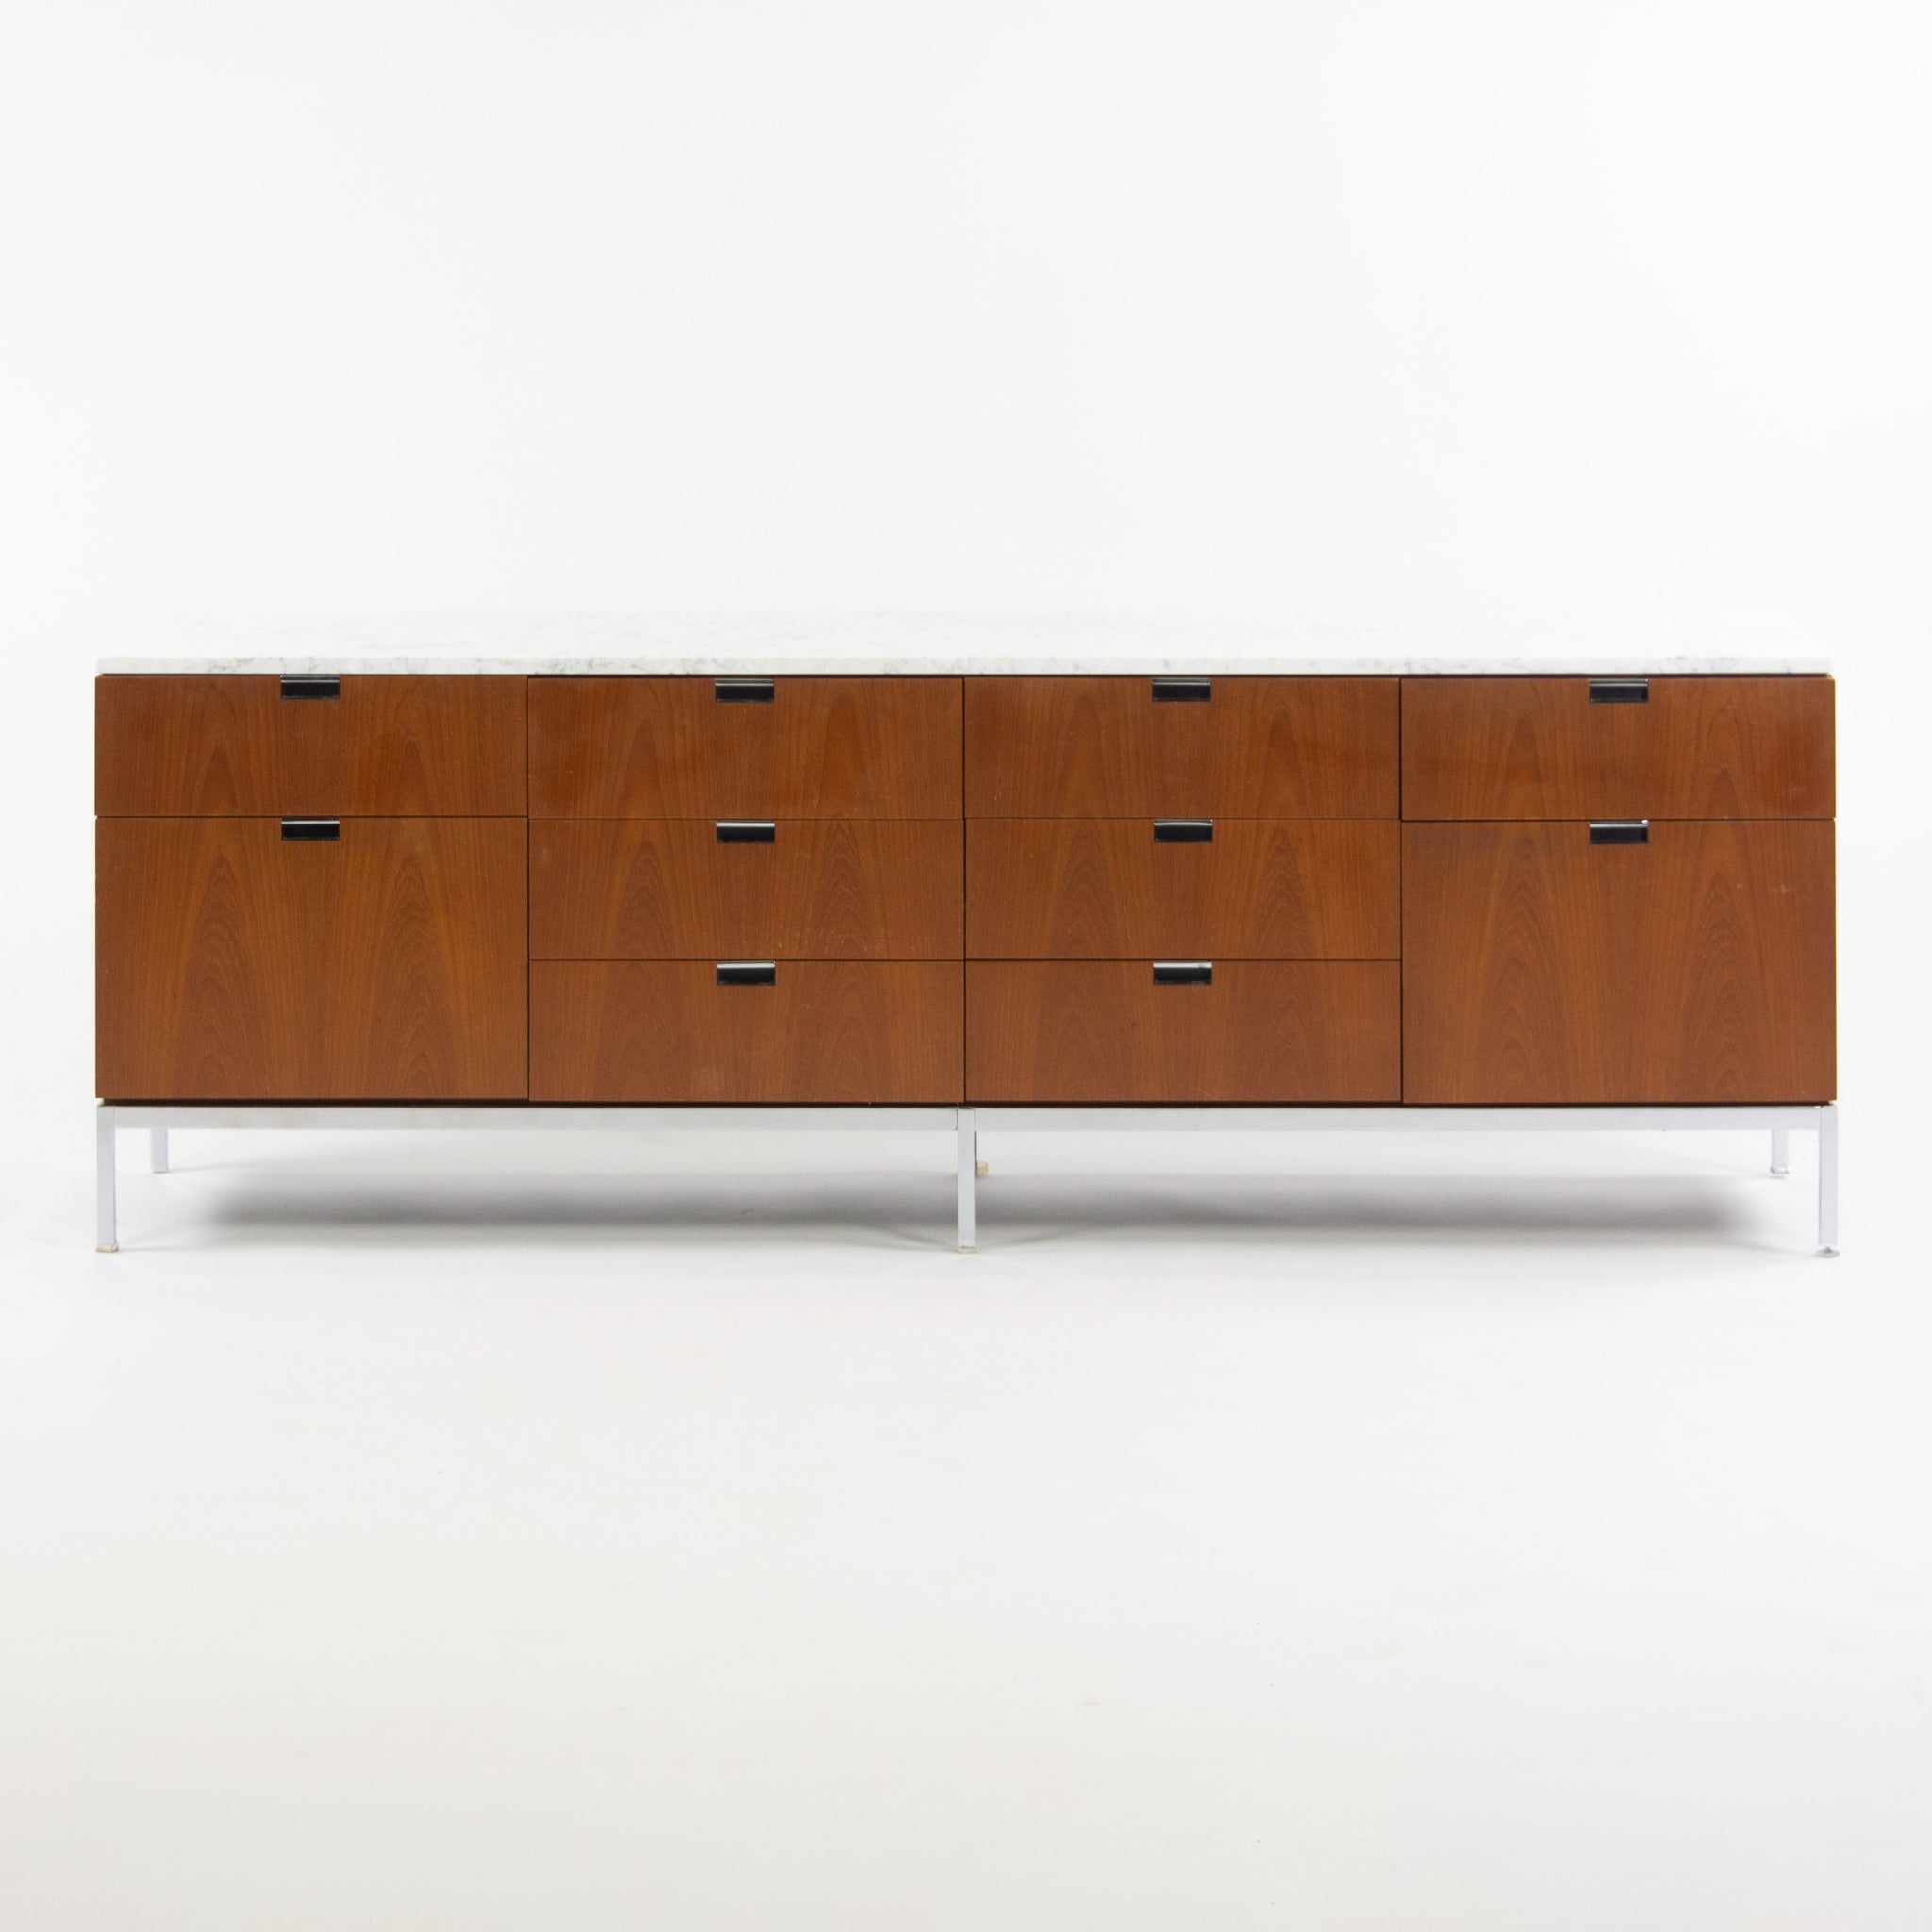 SOLD 1960's Vintage Florence Knoll Walnut and Marble Credenza Cabinet Sideboard